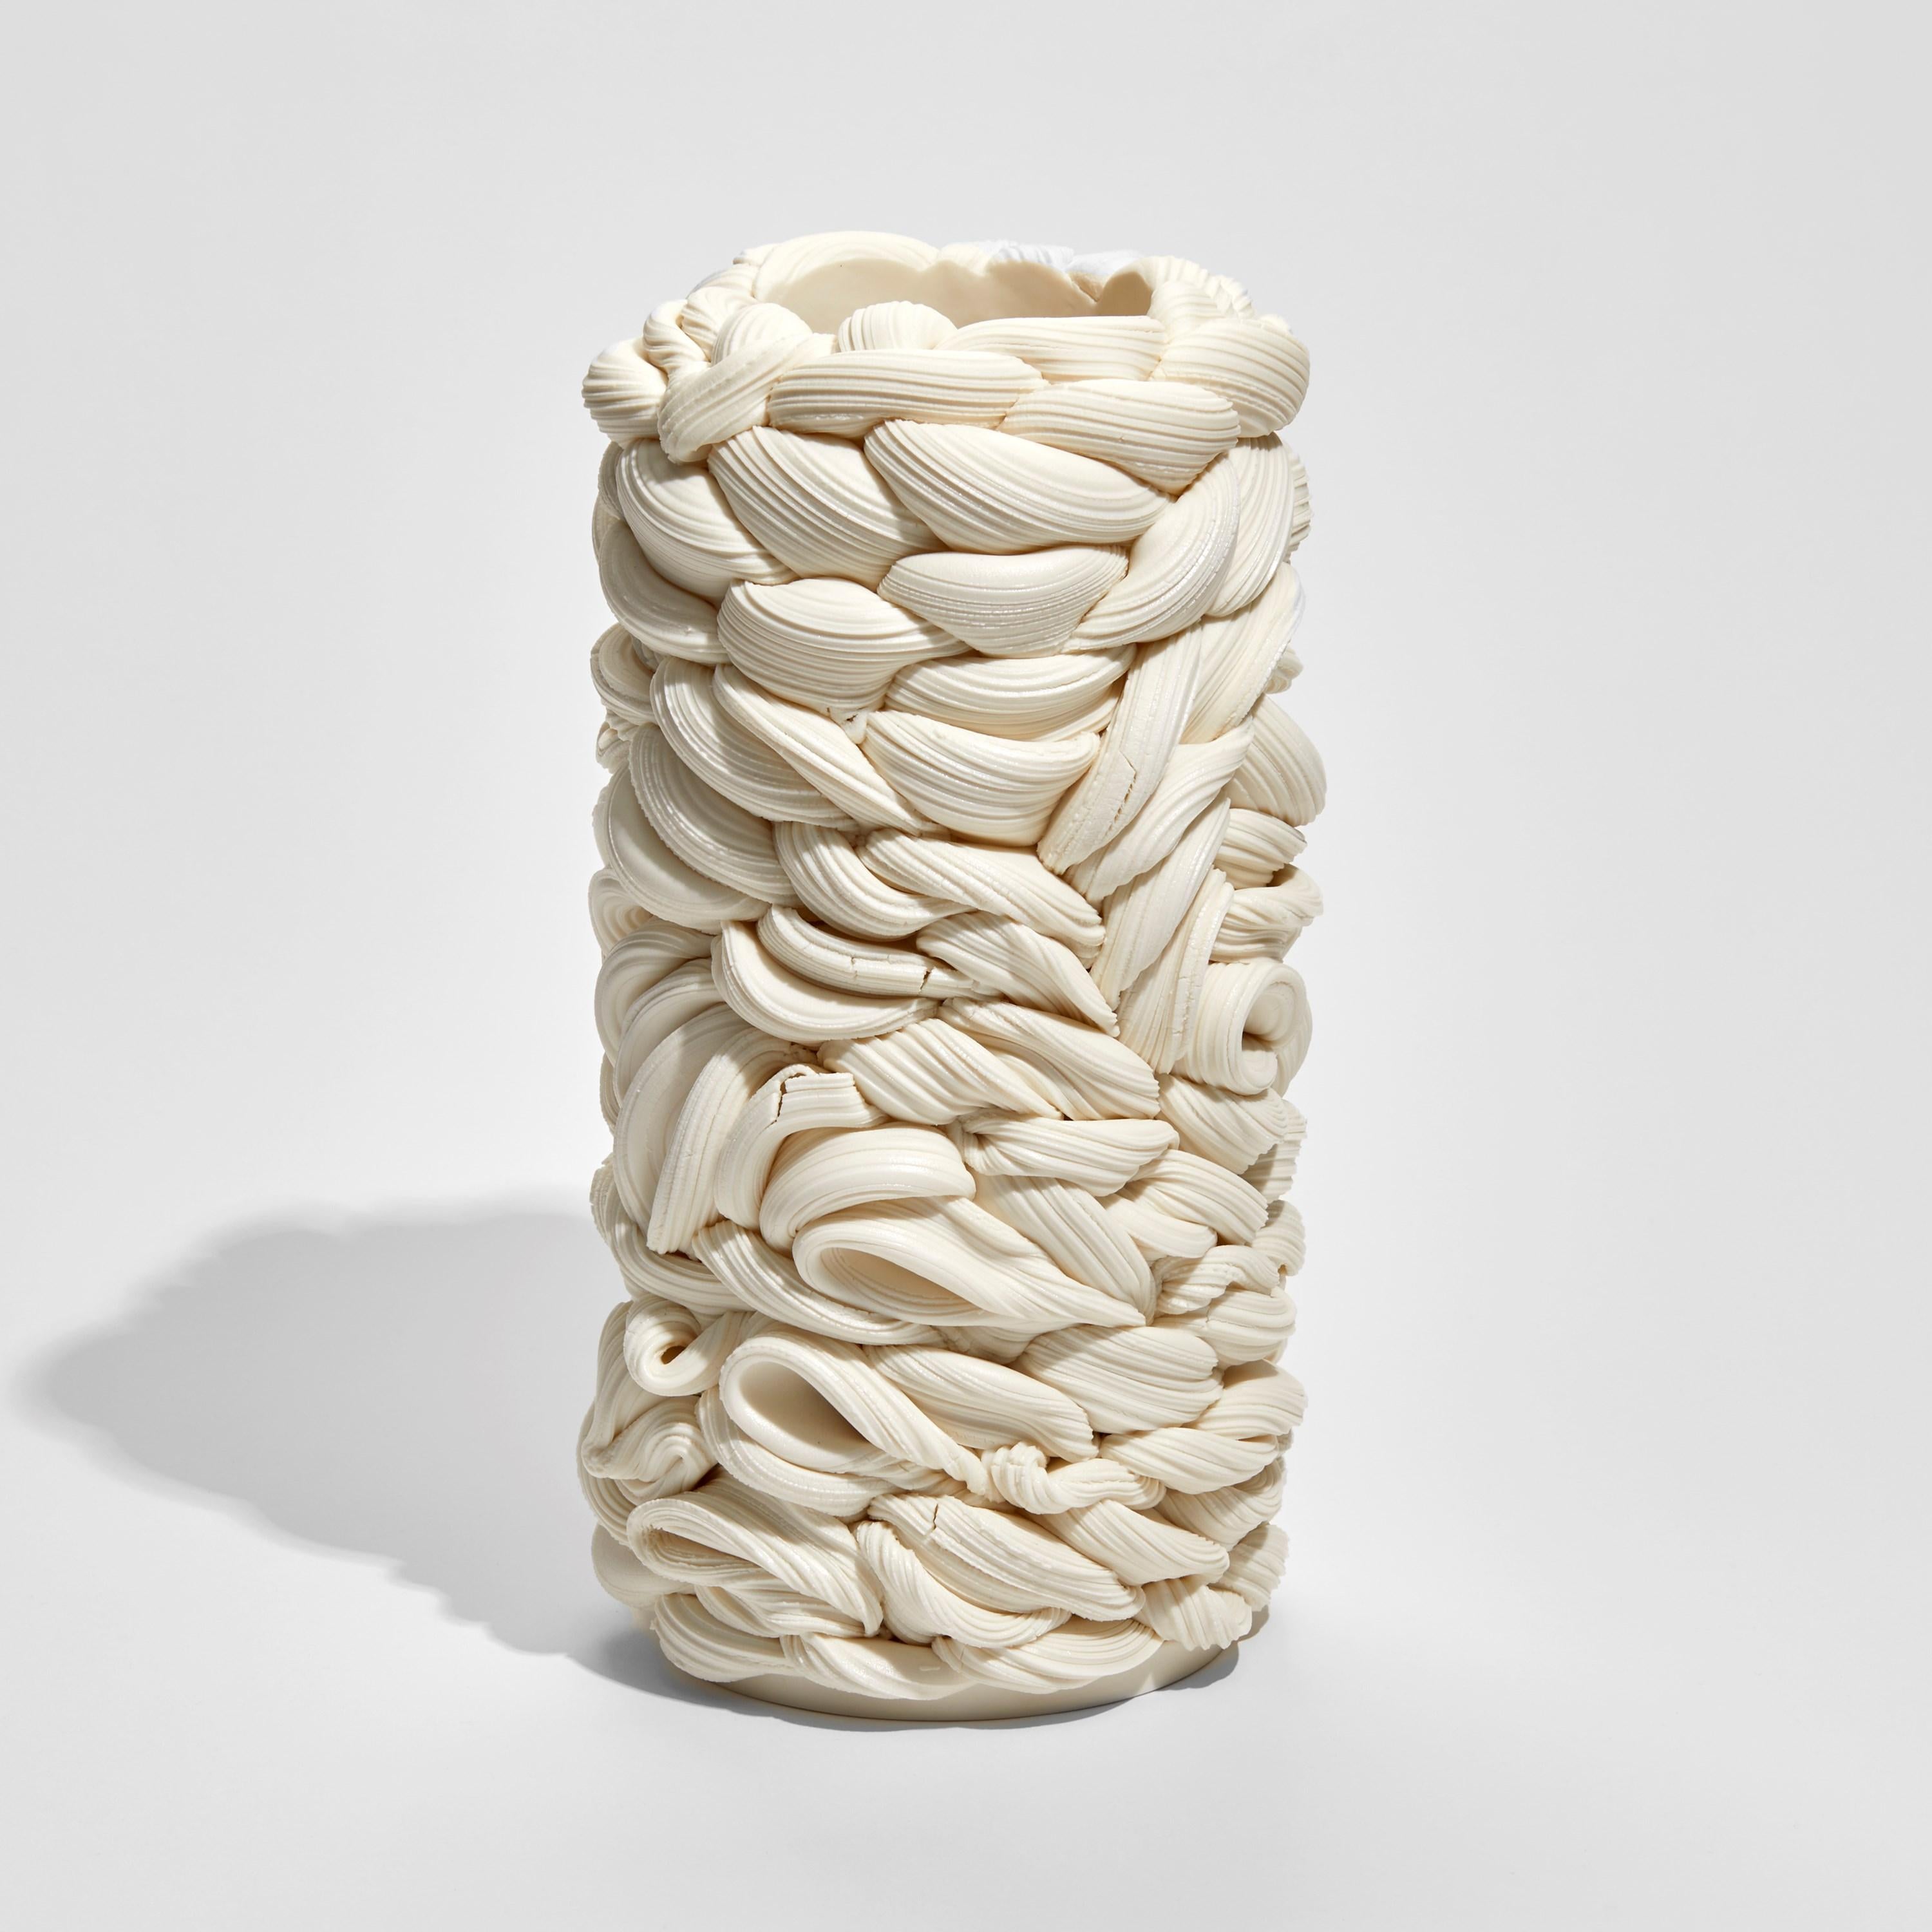 Organic Modern Achromatic Fold in White II, a Parian Porcelain Vessel by Steven Edwards For Sale